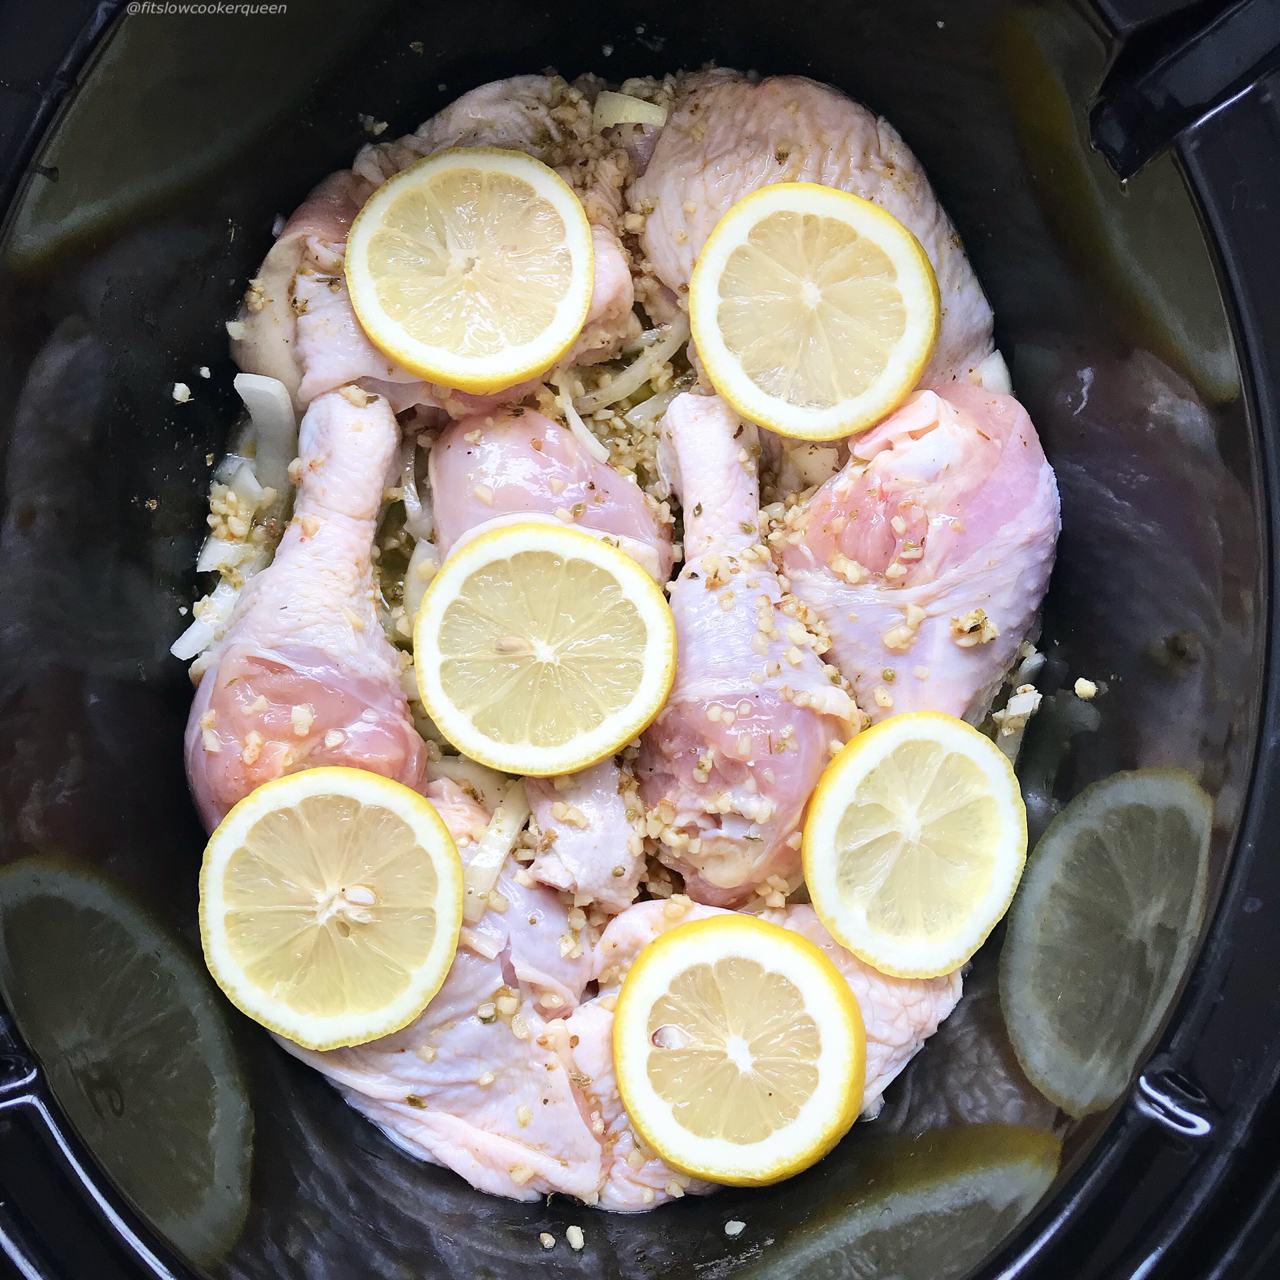 A simple garlic citrus sauce based on Cuban mojo marinade cooks with chicken (or pork) in this healthy (paleo,whole30) slow cooker recipe. Serve this succulent chicken with your favorite side dishes for an easy yet flavorful meal.